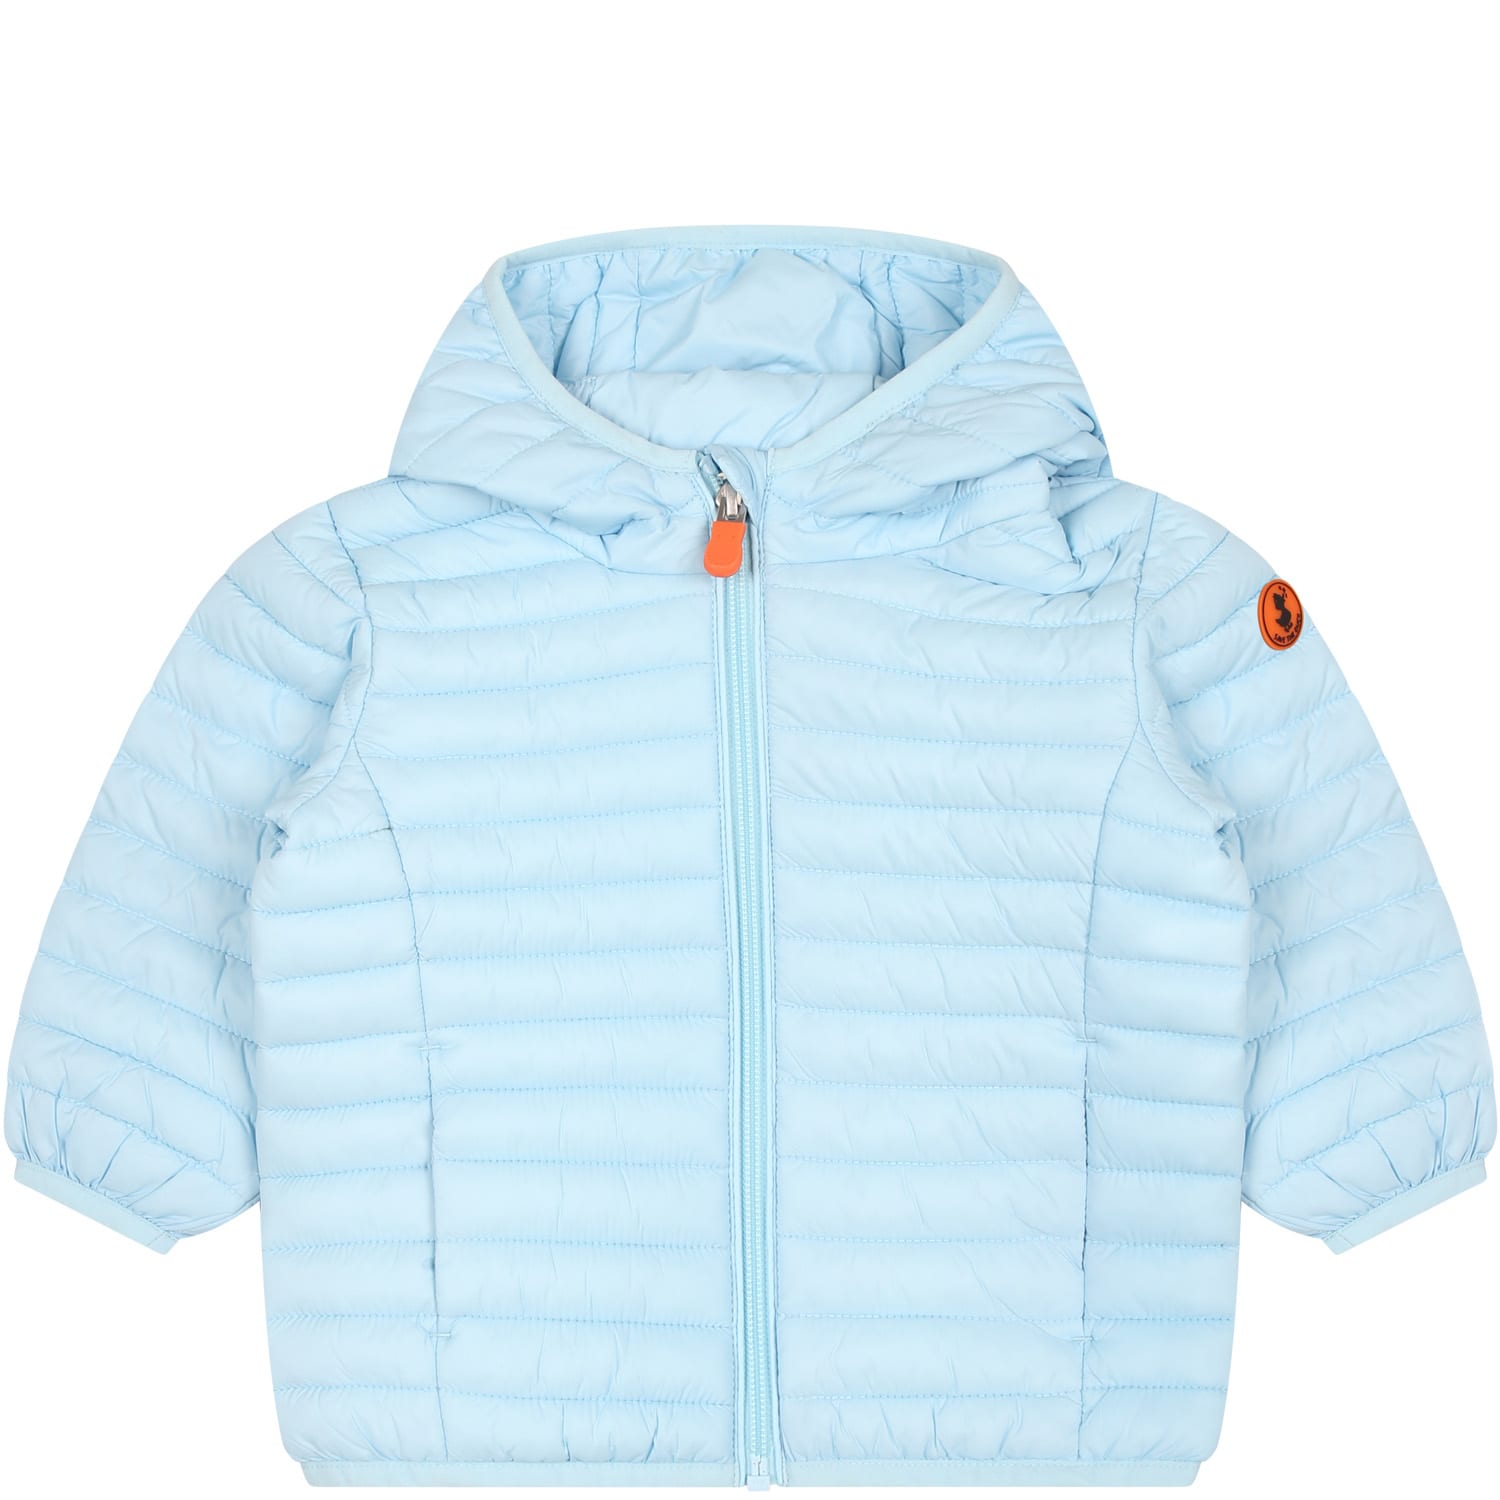 Shop Save The Duck Light Blue Nene Down Jacket For Baby Boy With Logo